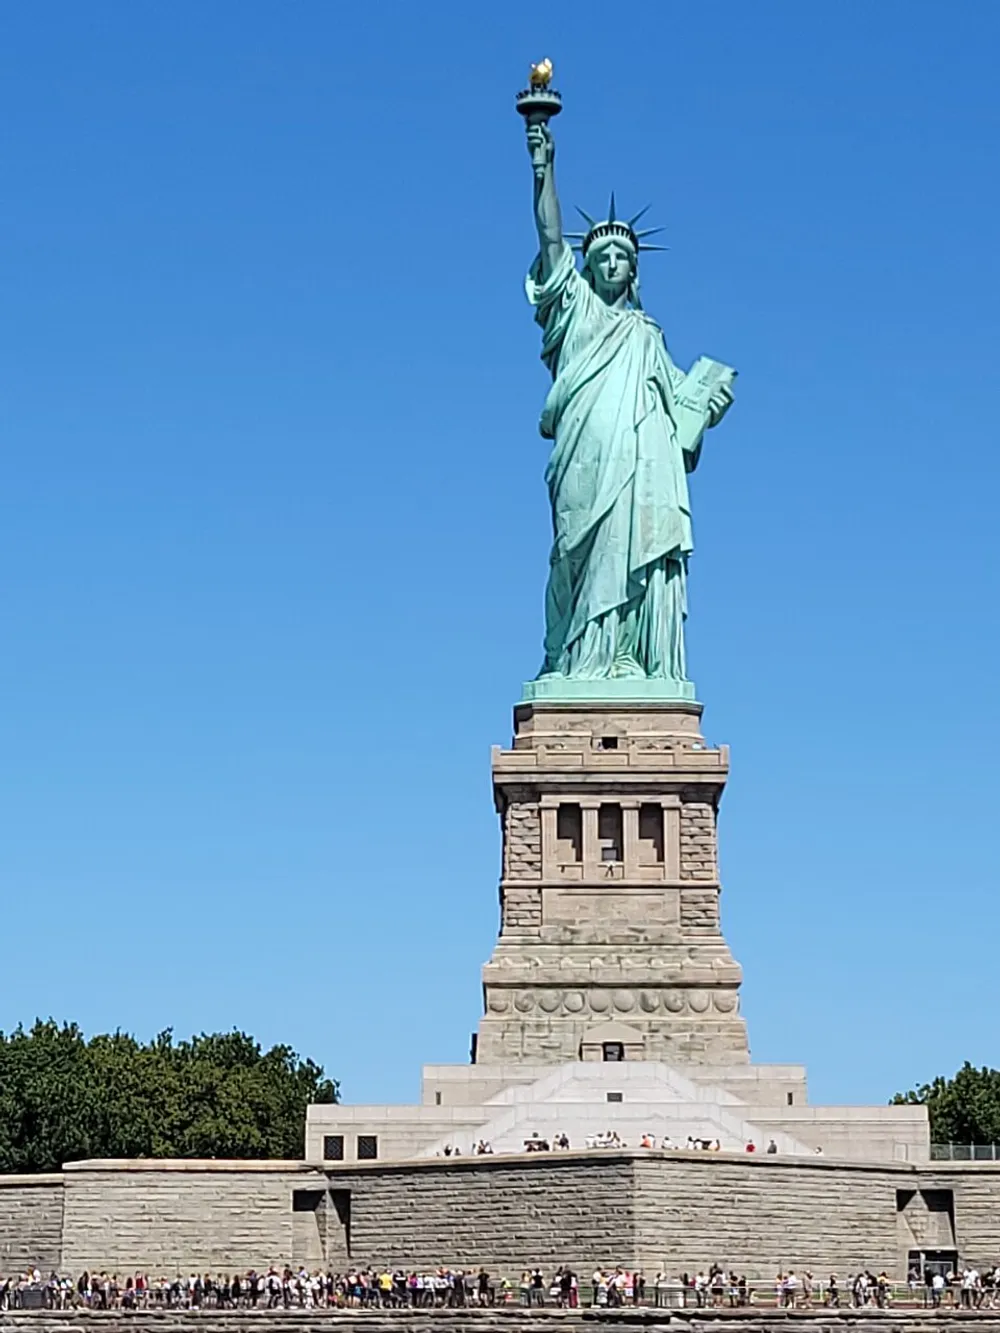 The image shows the Statue of Liberty against a clear blue sky with numerous visitors at its base